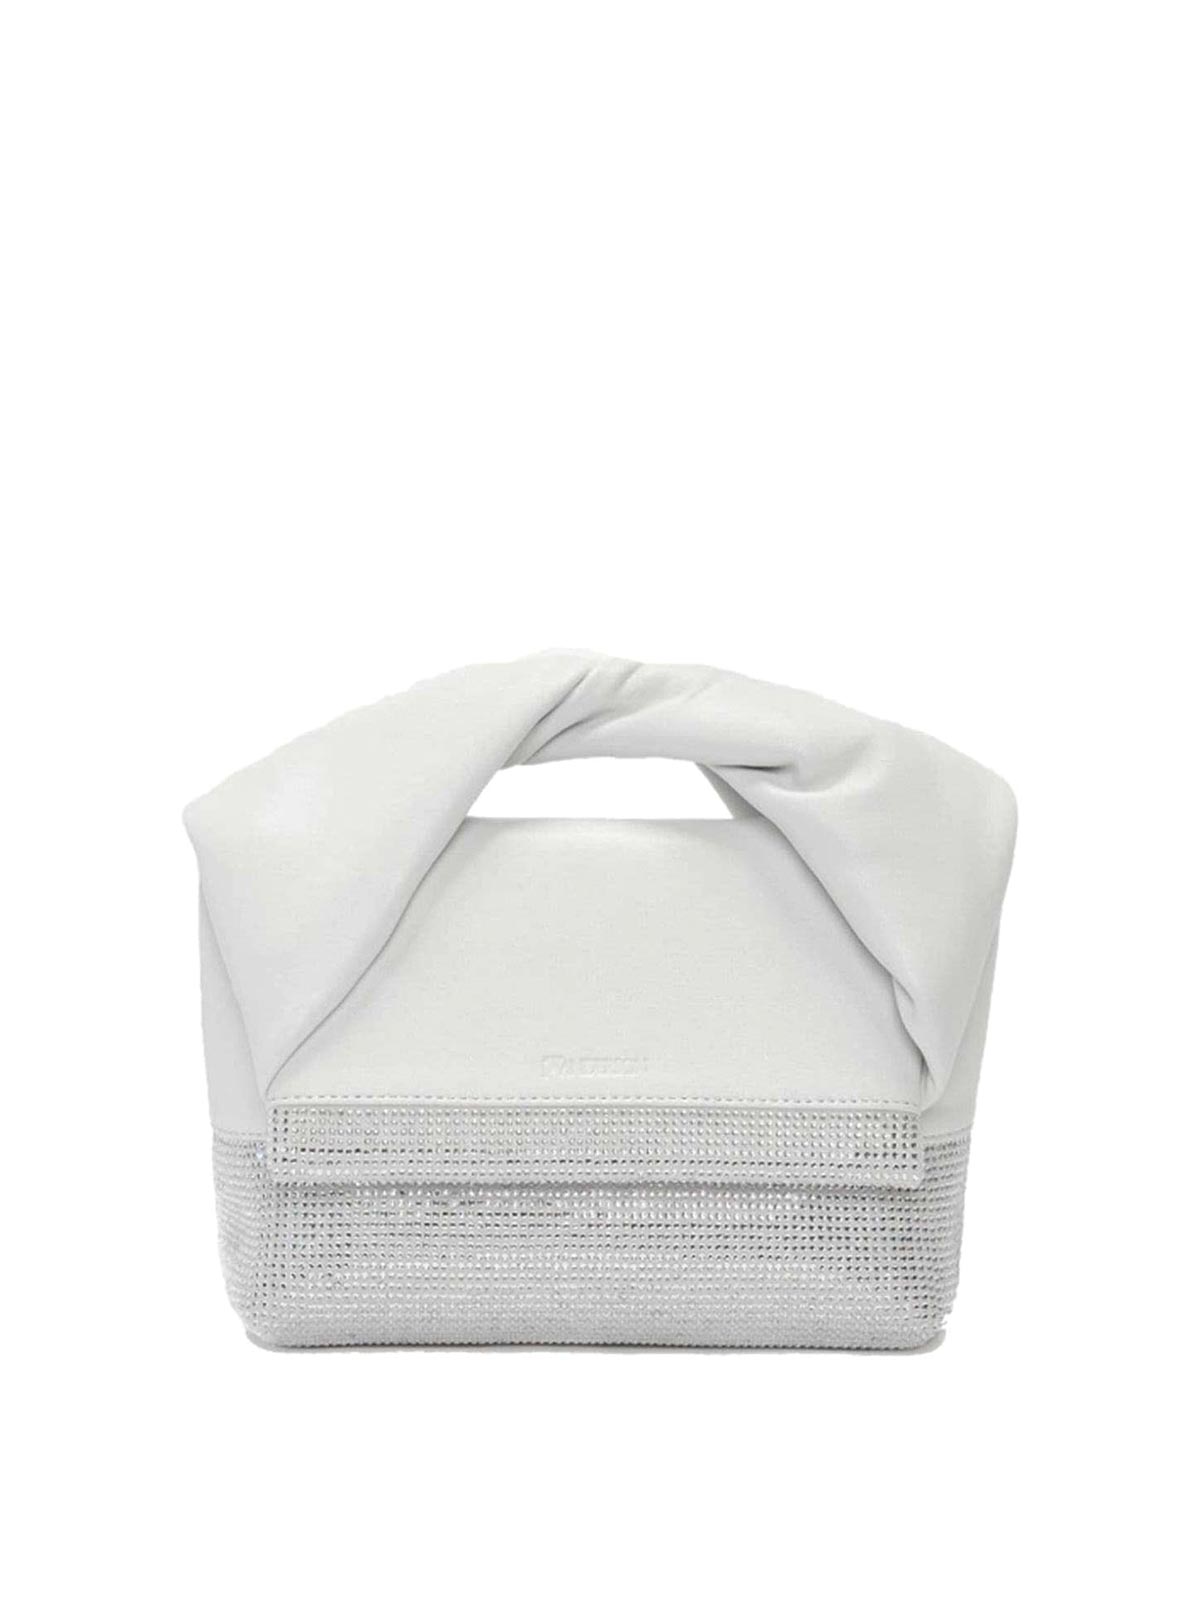 Jw Anderson Twister Midi Bag With Crystals In White